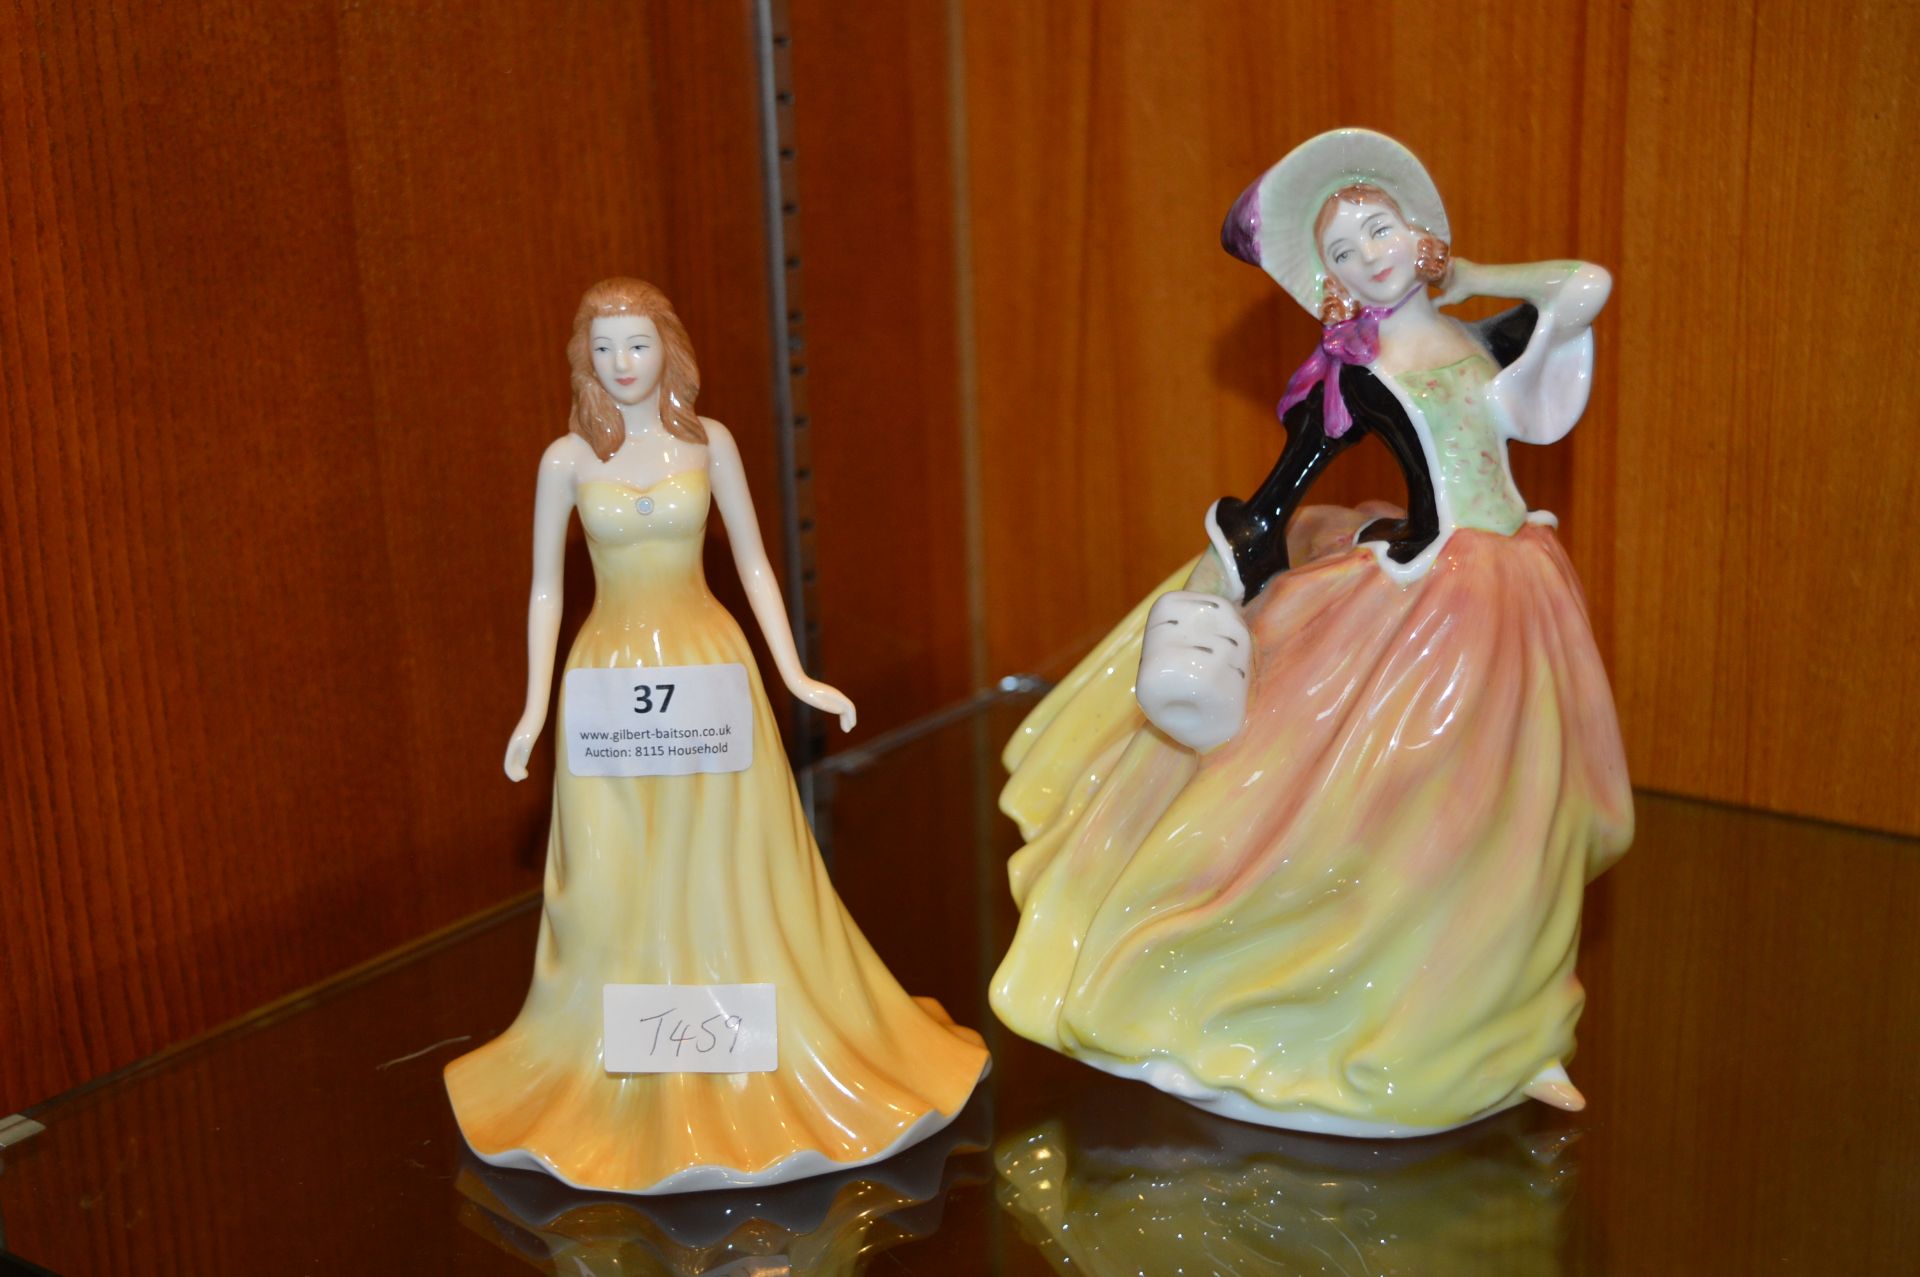 Two Royal Doulton Figurines - October Opal and Aut